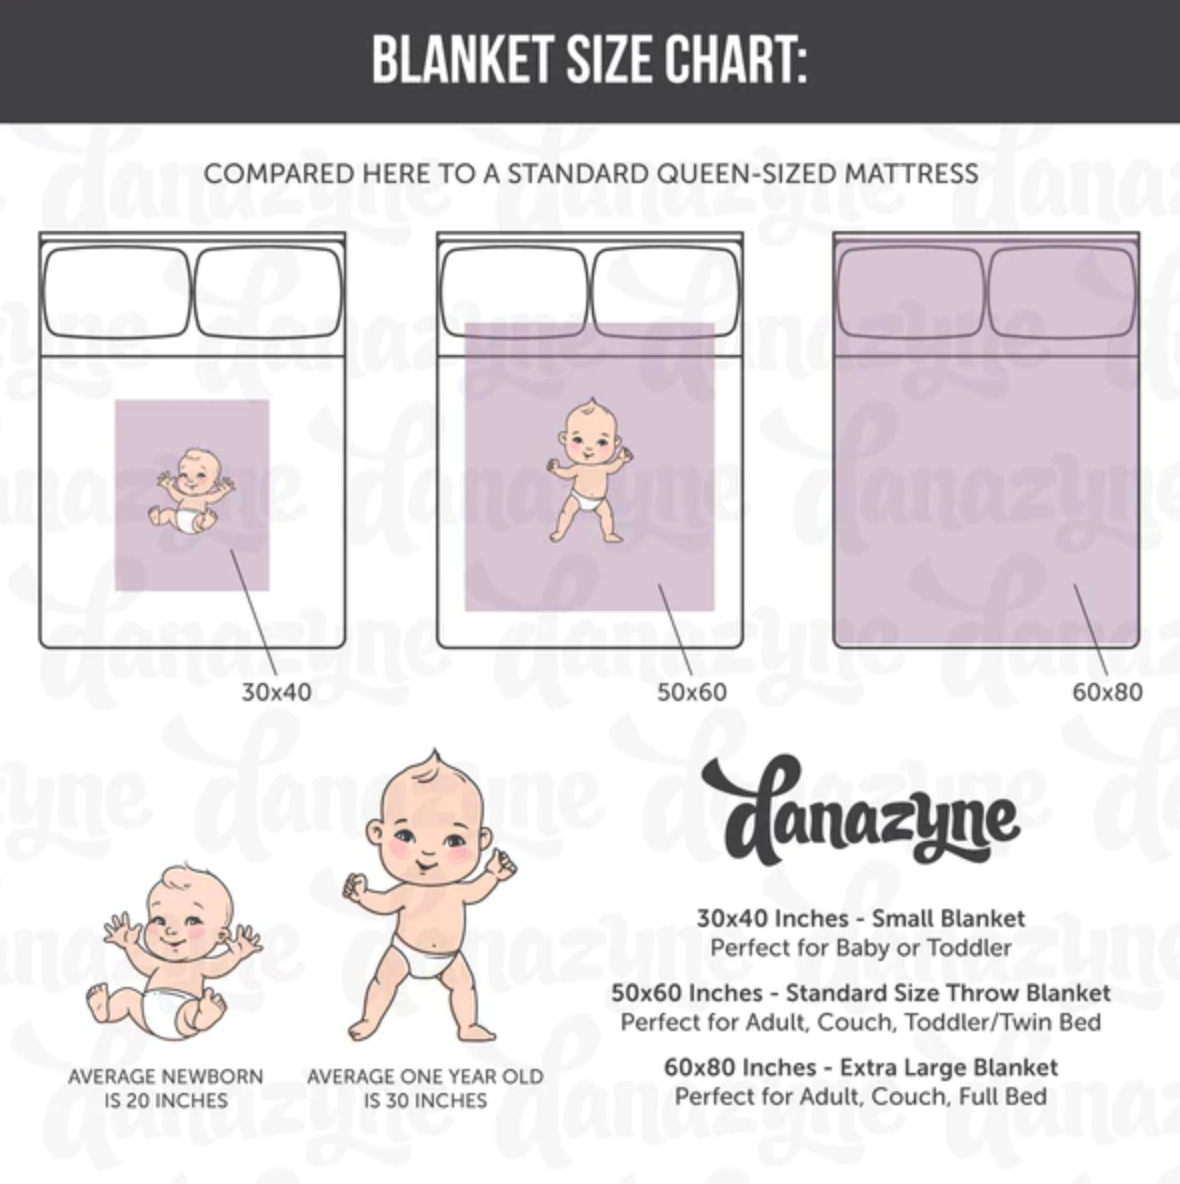 Personalized Repeating Name Plush Minky Blanket - Design It Yourself Font & Color Selection